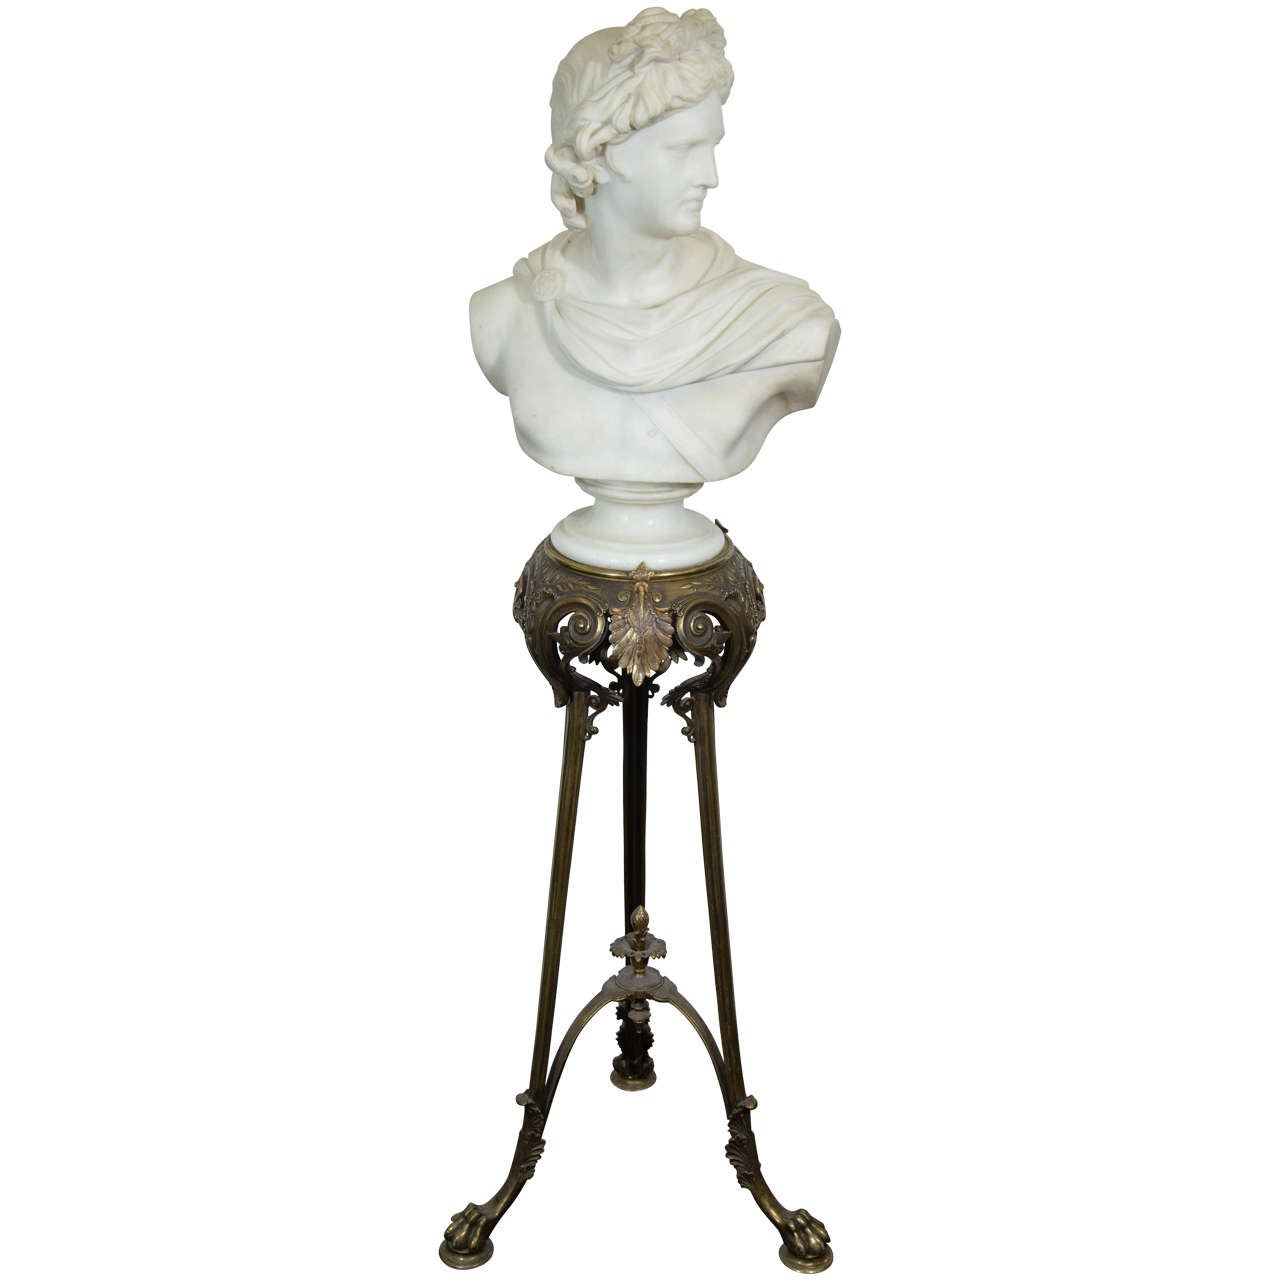 Antique Grand Tour Apollo Belvedere Signed Marble Bust on Bronze Tripod Base